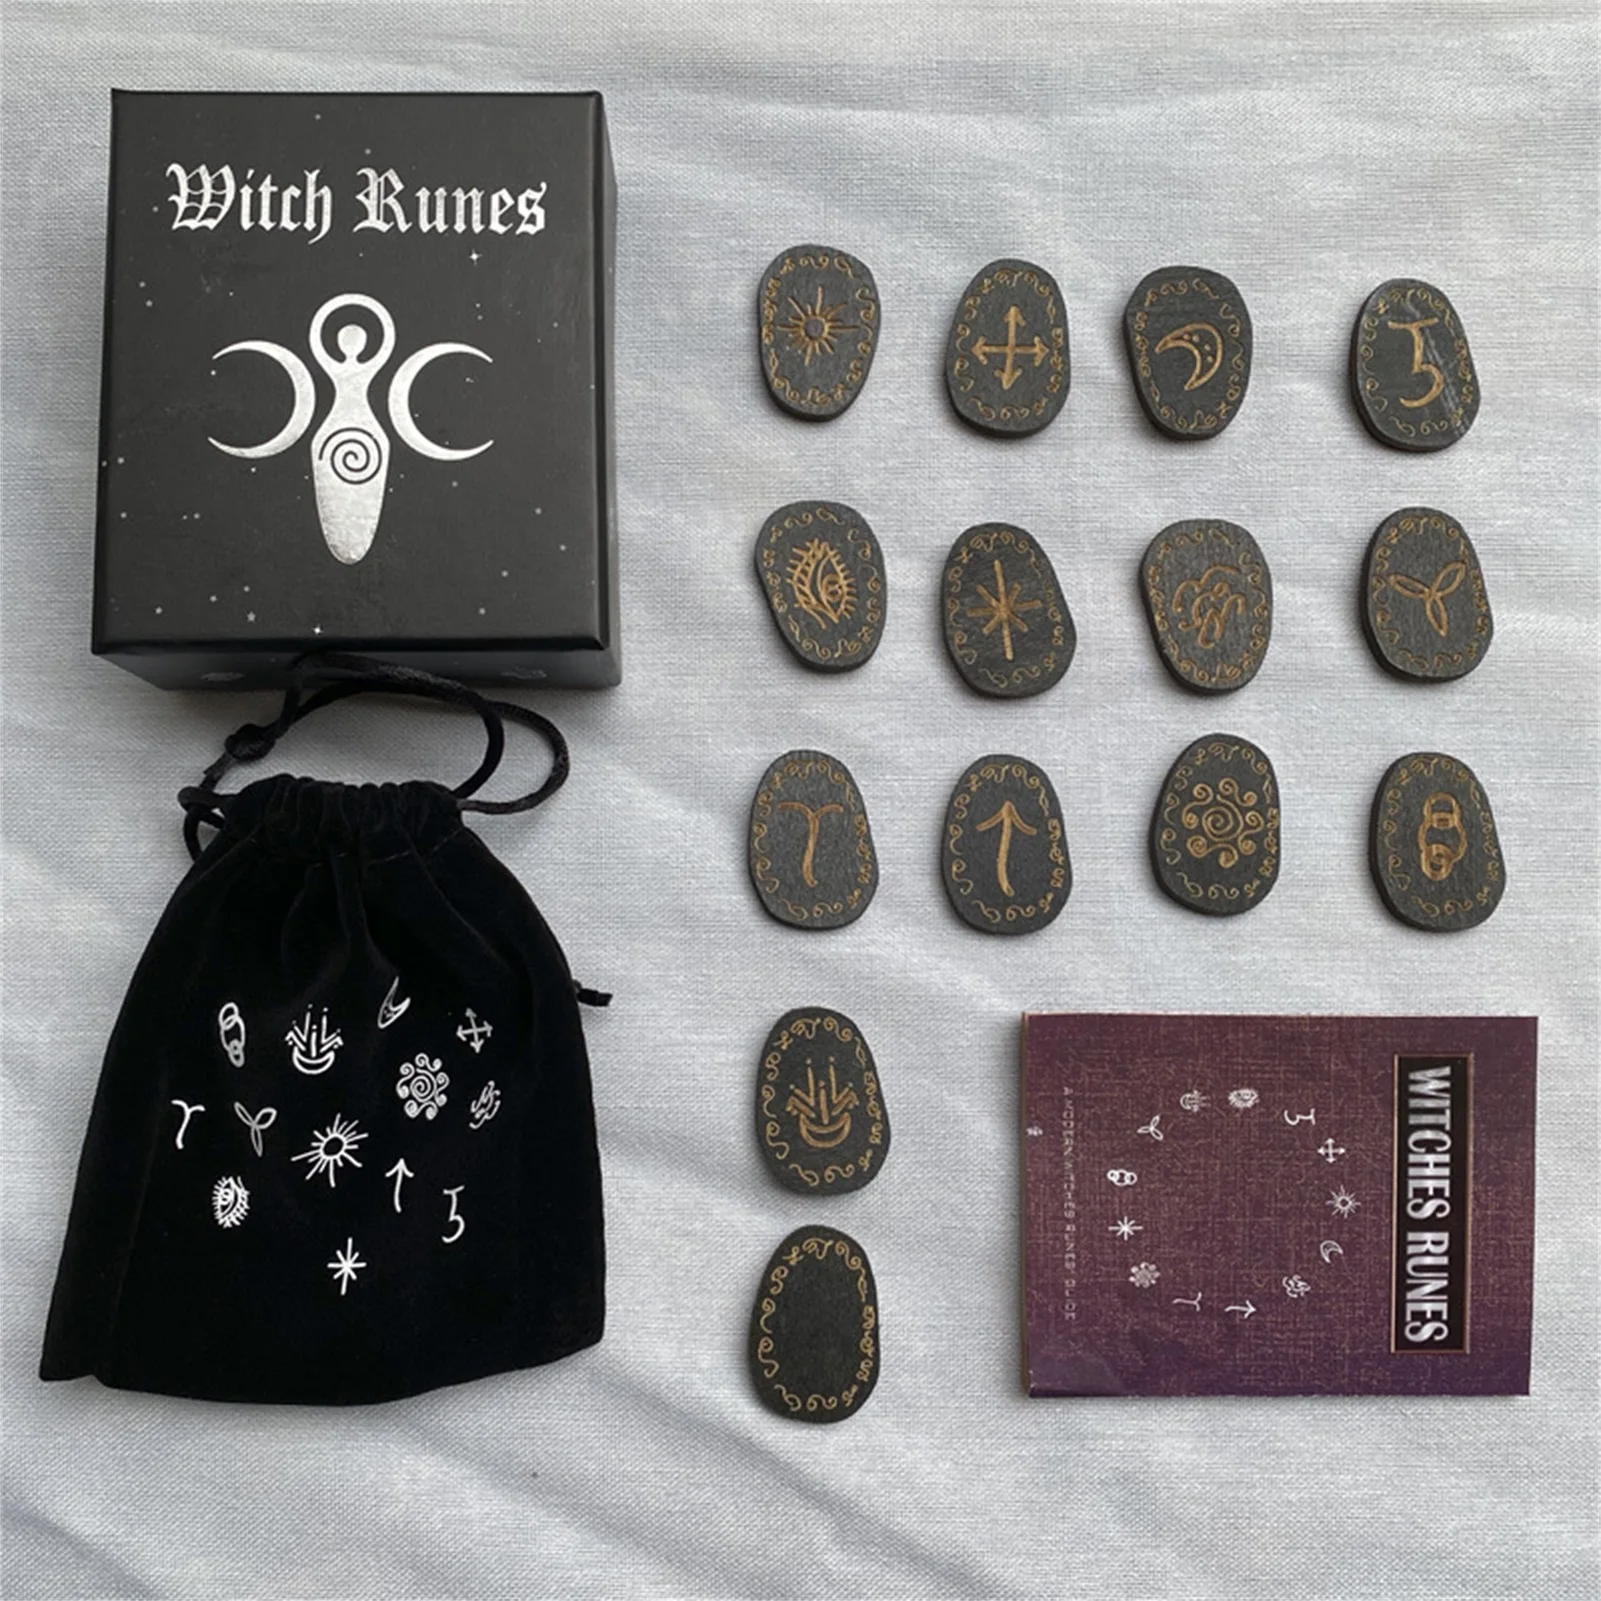 

Wooden Runes Stone Set Witches Rune Set 14 Pcs Engraved Rune Symbol for Meditation Divination Rune Stones Set with Storage Bag